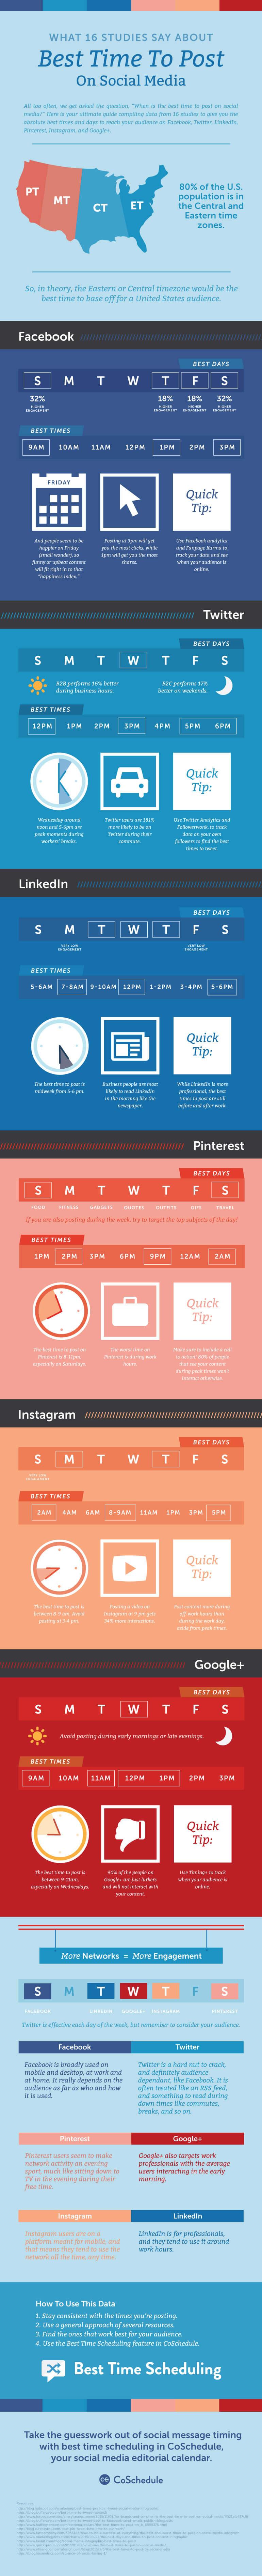 All the best times to post to social media, by network